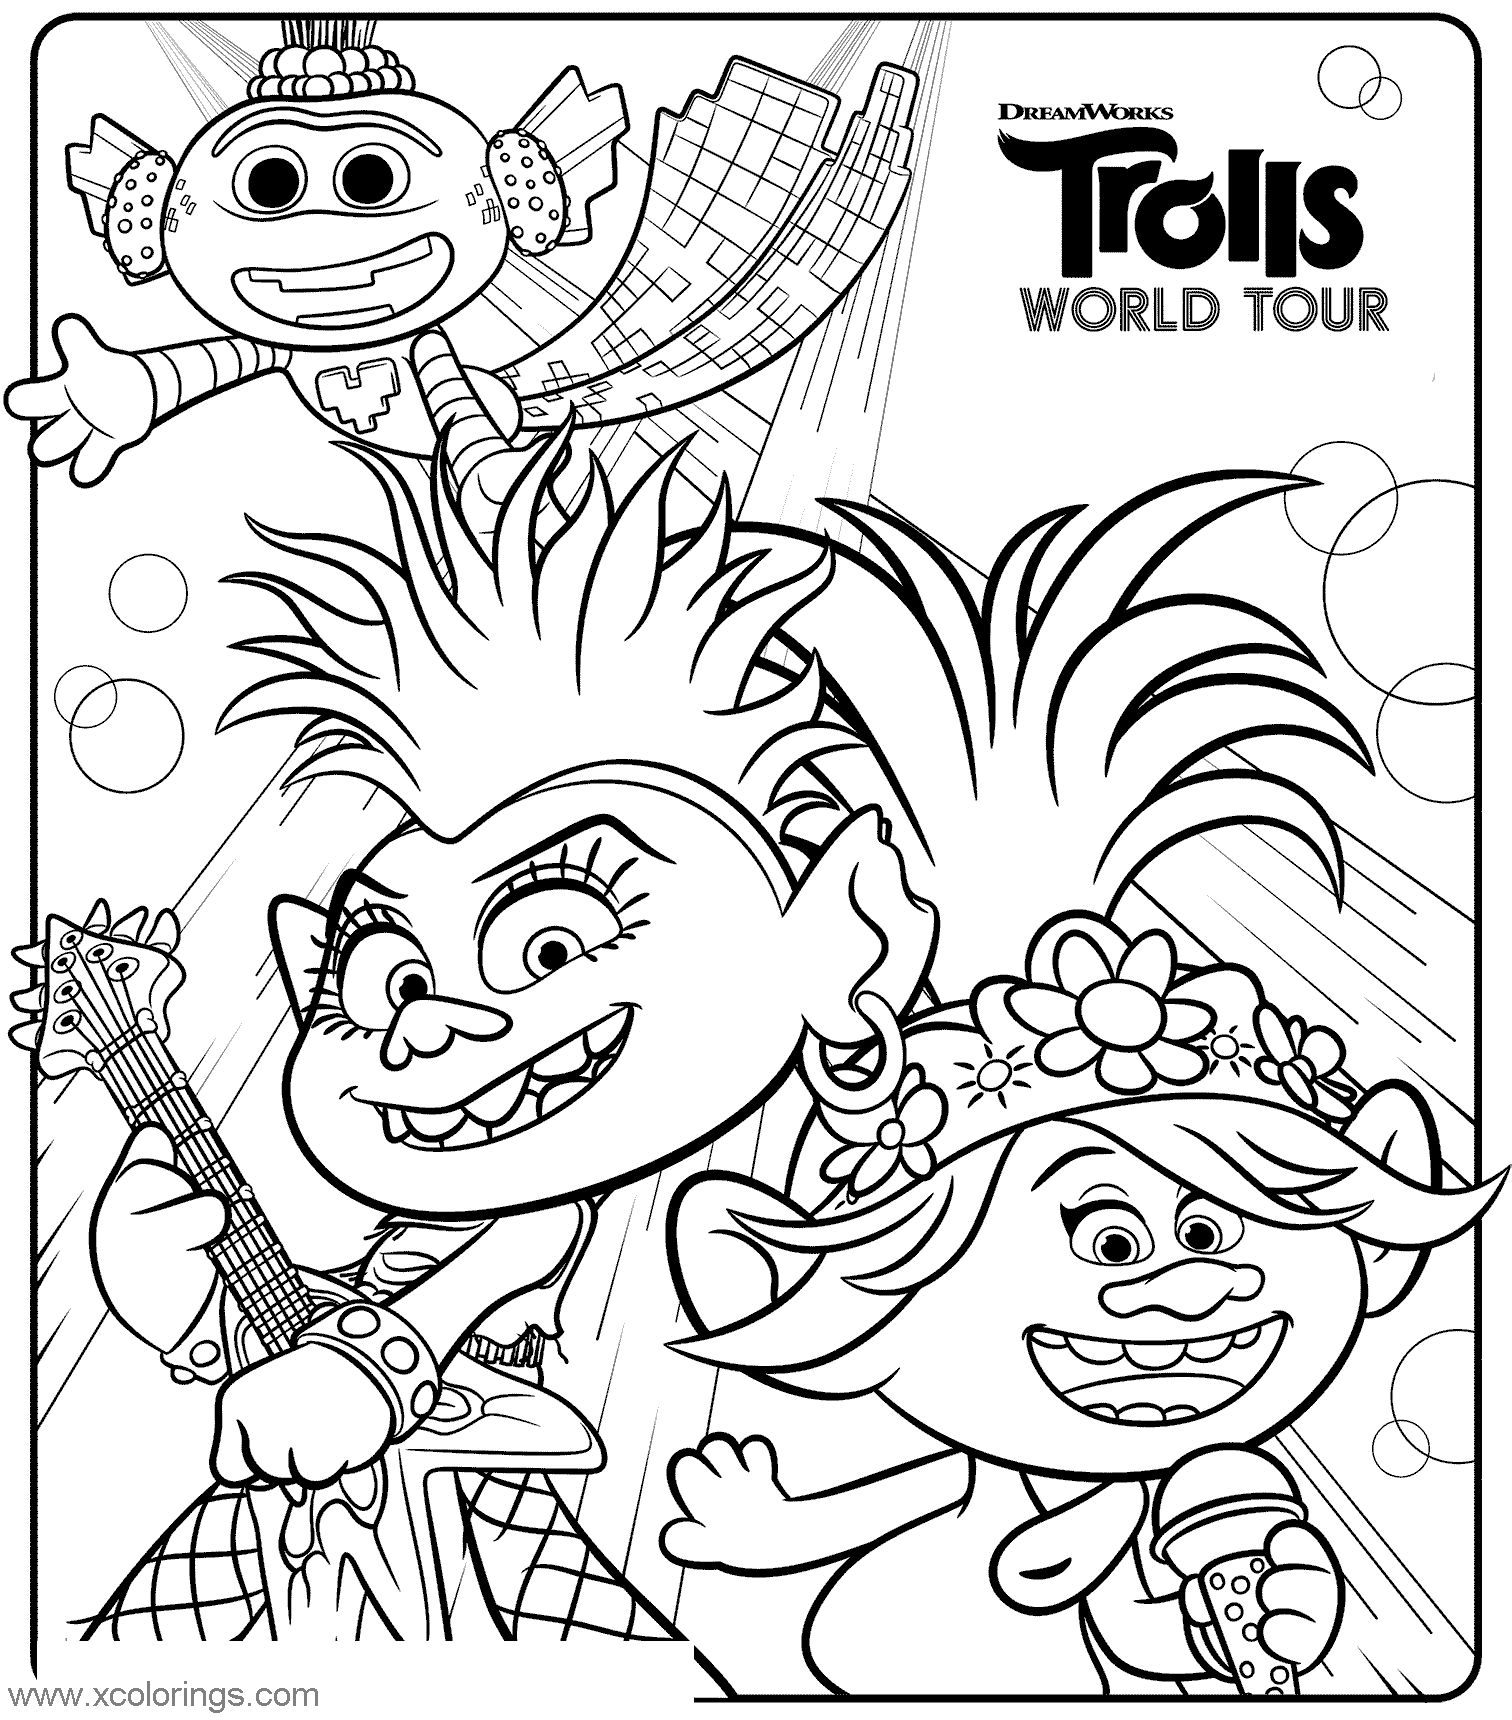 Free Trolls World Tour Coloring Pages Characters printable